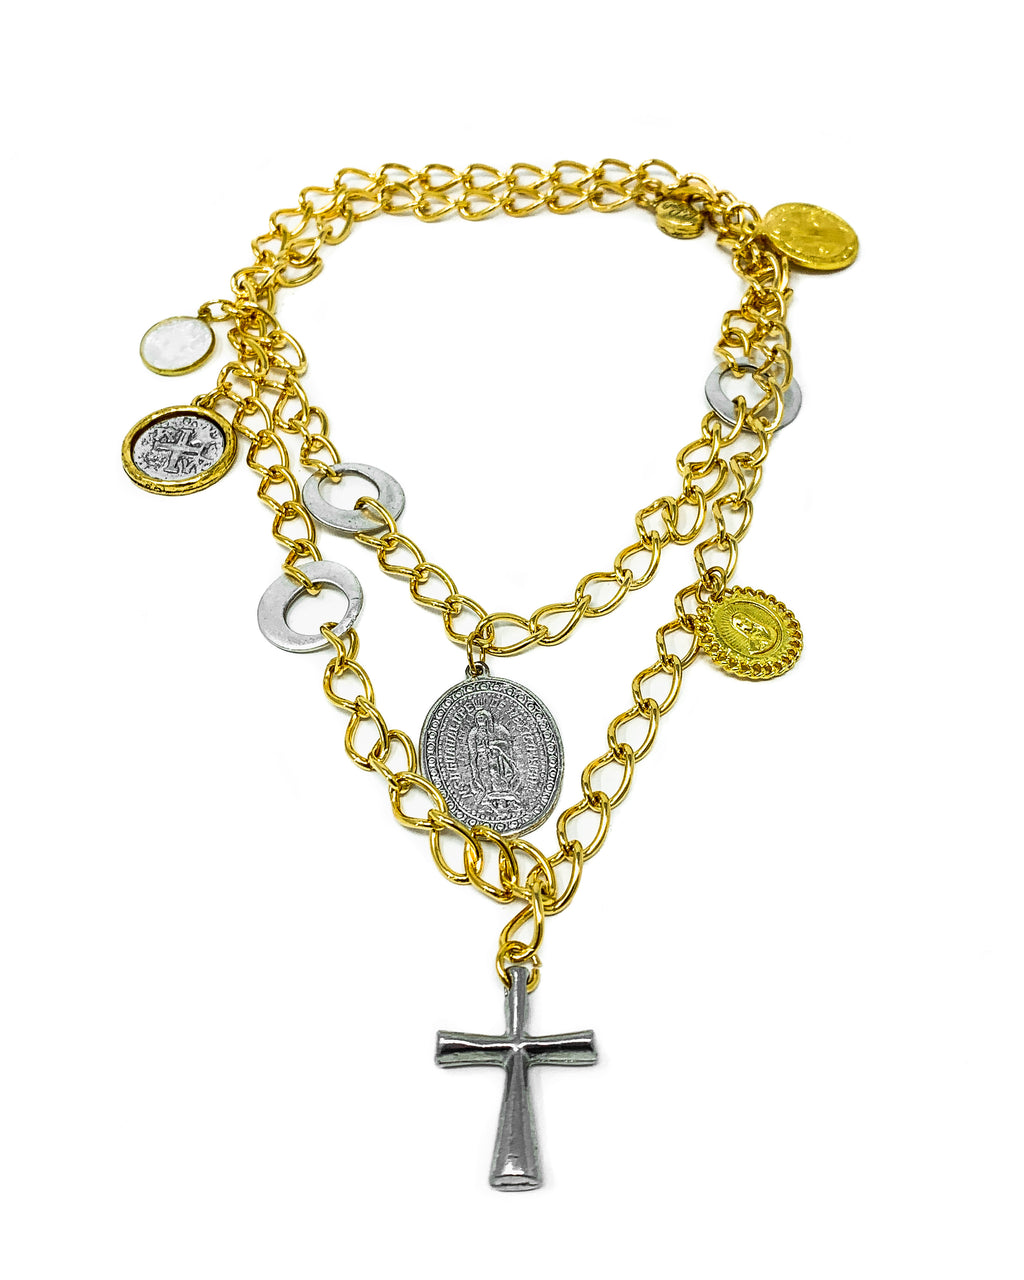 Saints GOLD Necklace Cross and Chain Jewelry stores